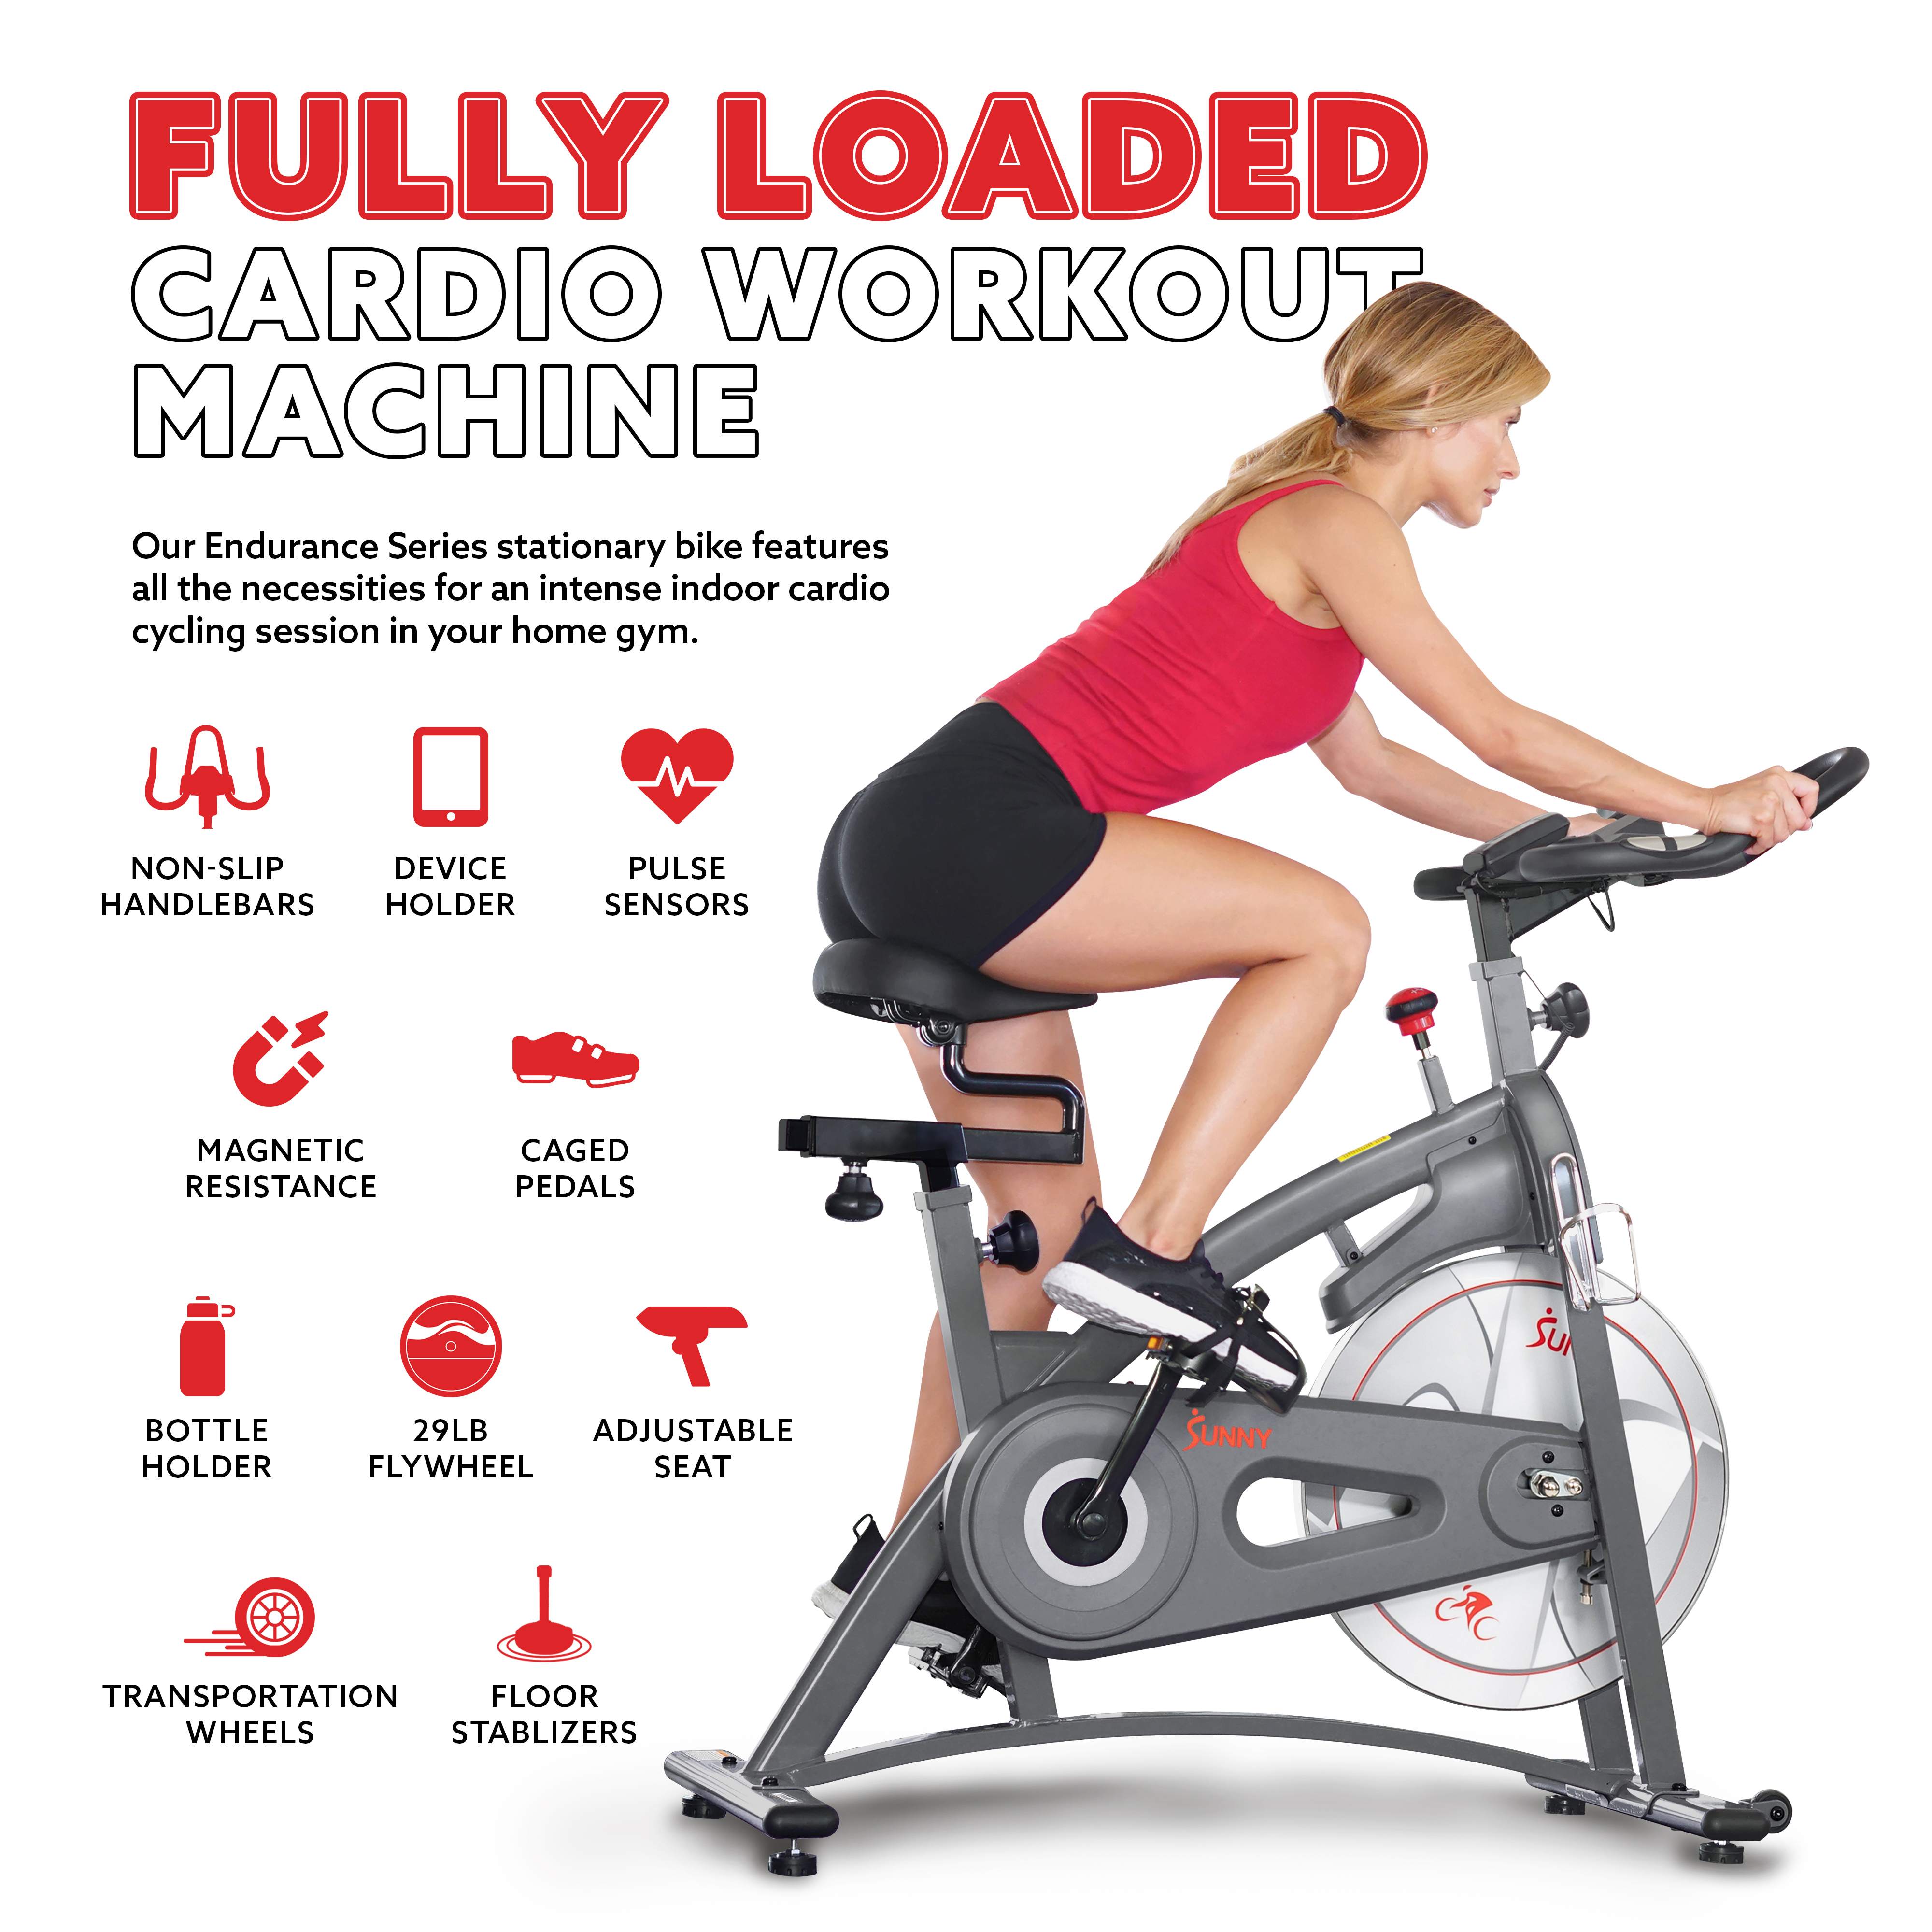 Sunny Health & Fitness Endurance Belt Drive Indoor Cycle Exercise Bike with Magnetic Resistance for Stationary Cardio, SF-B1877 - image 4 of 10